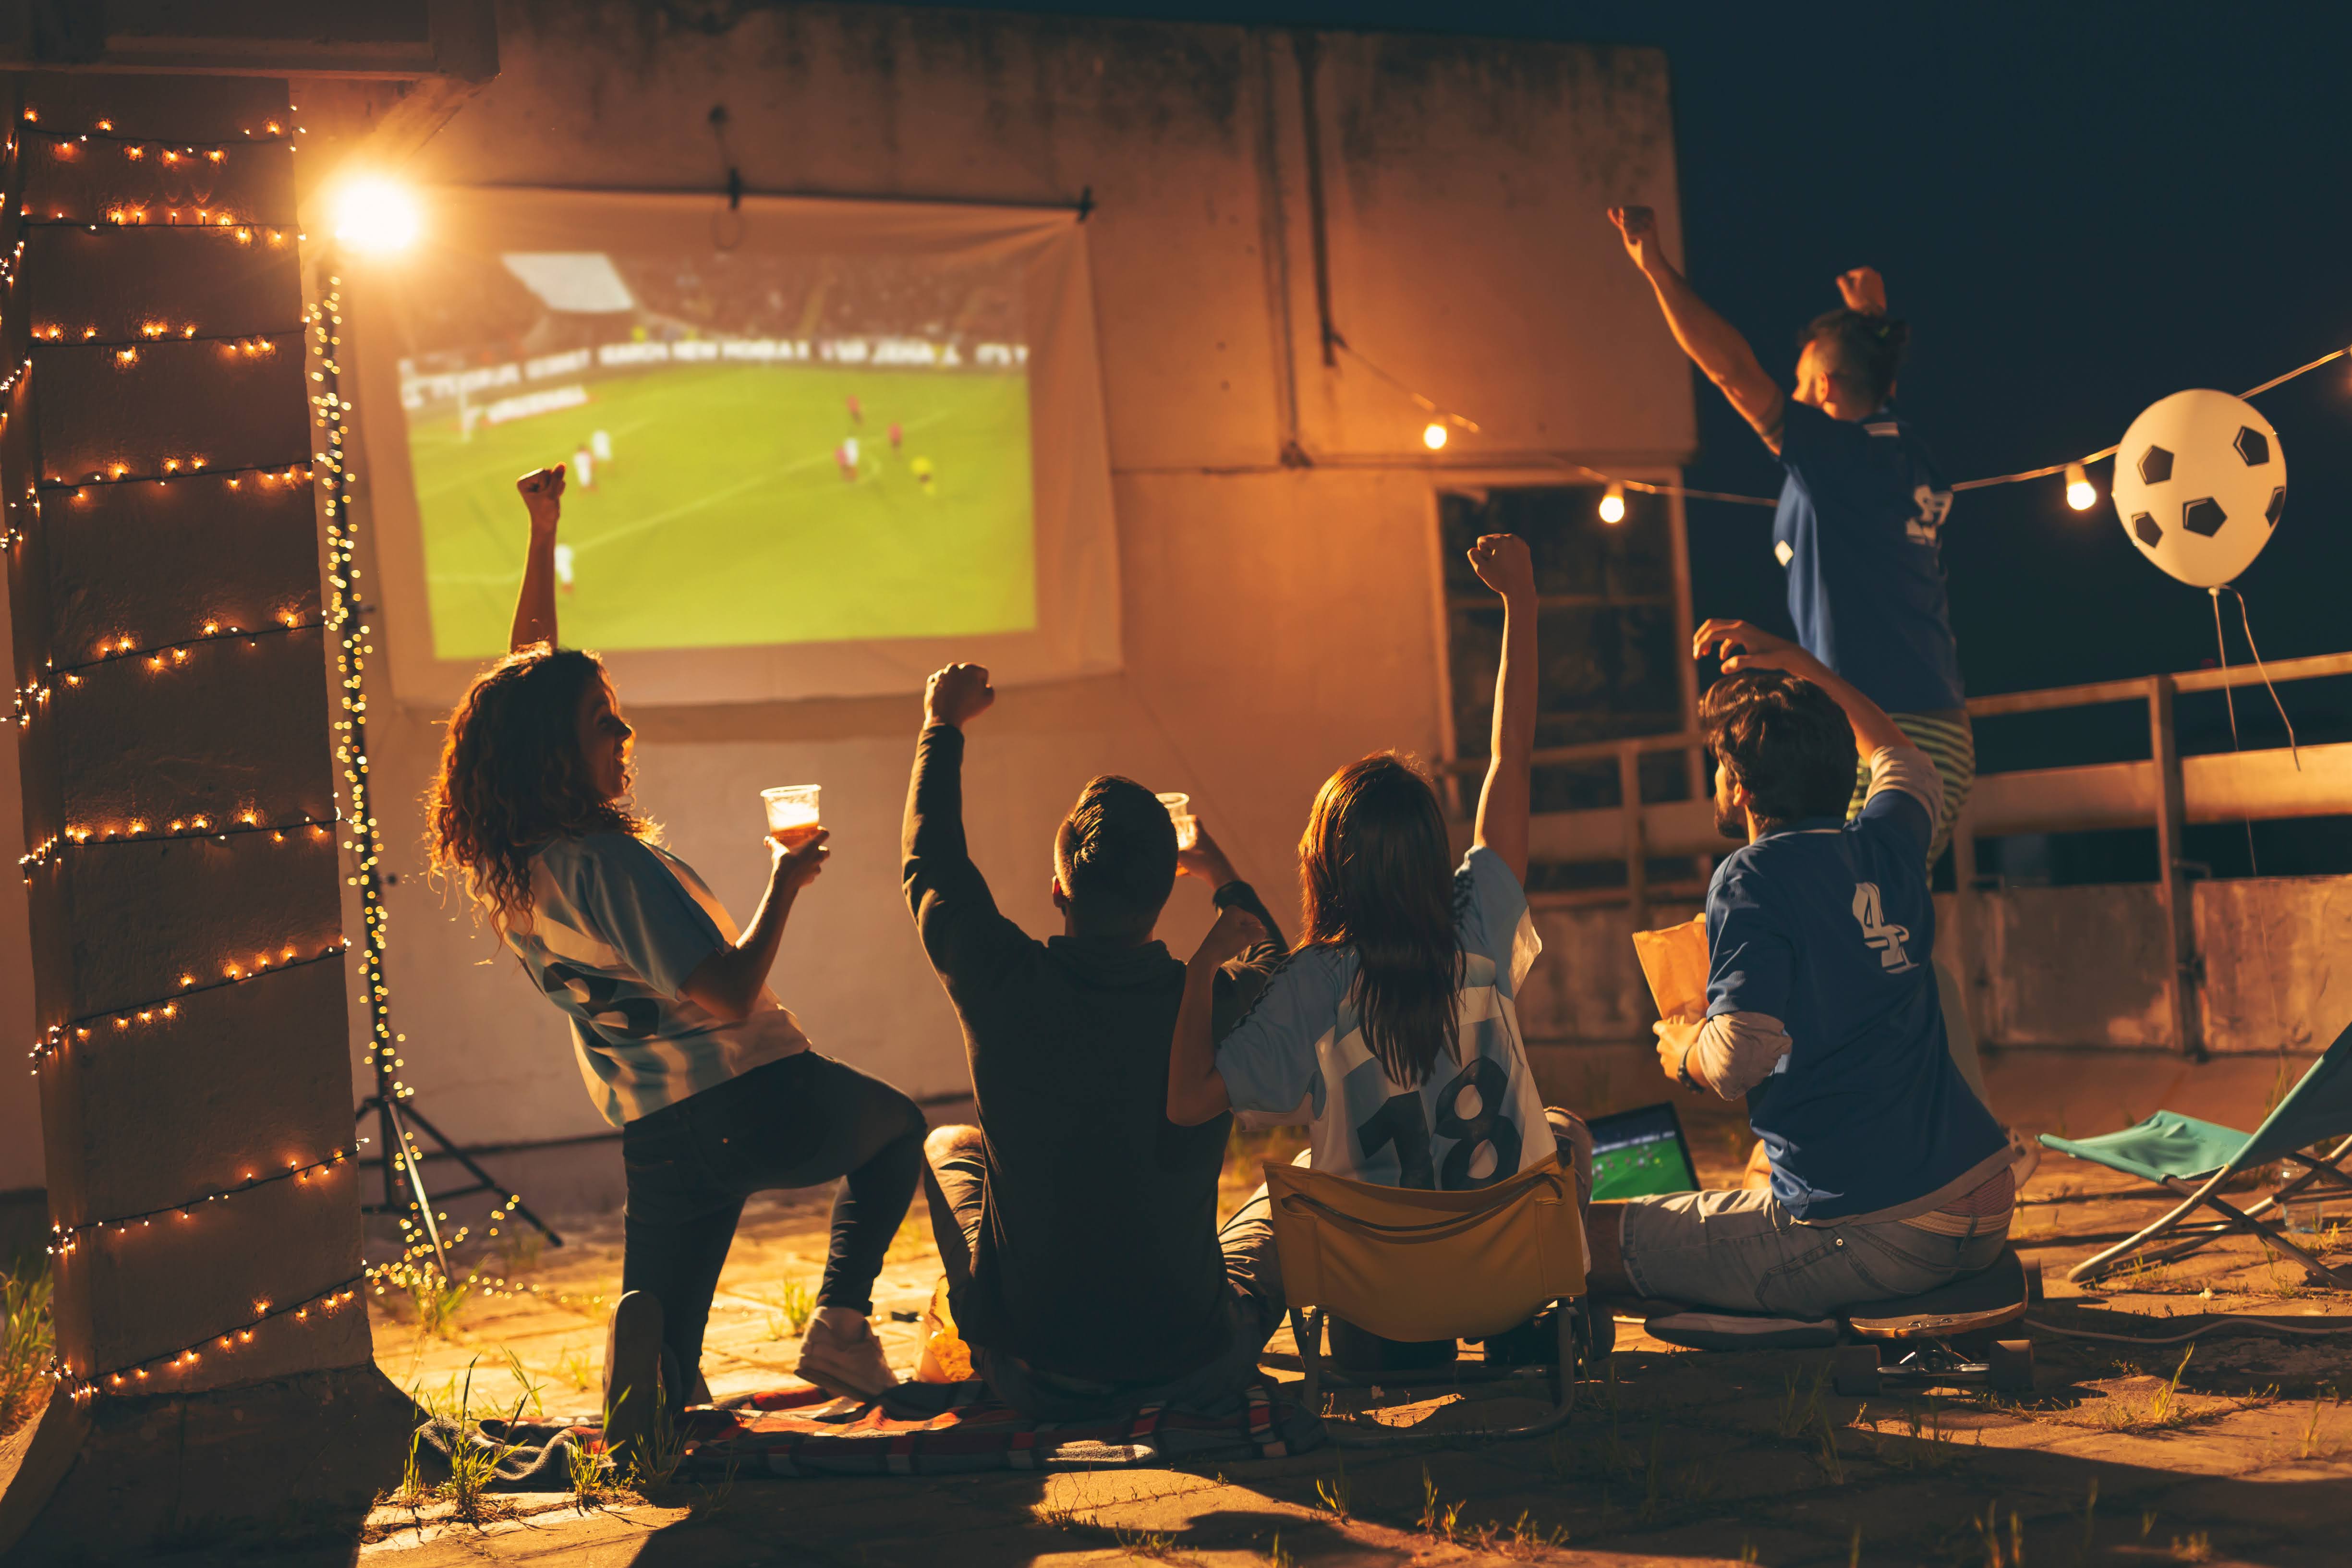 Best ideas for an epic movie night or sports night at home